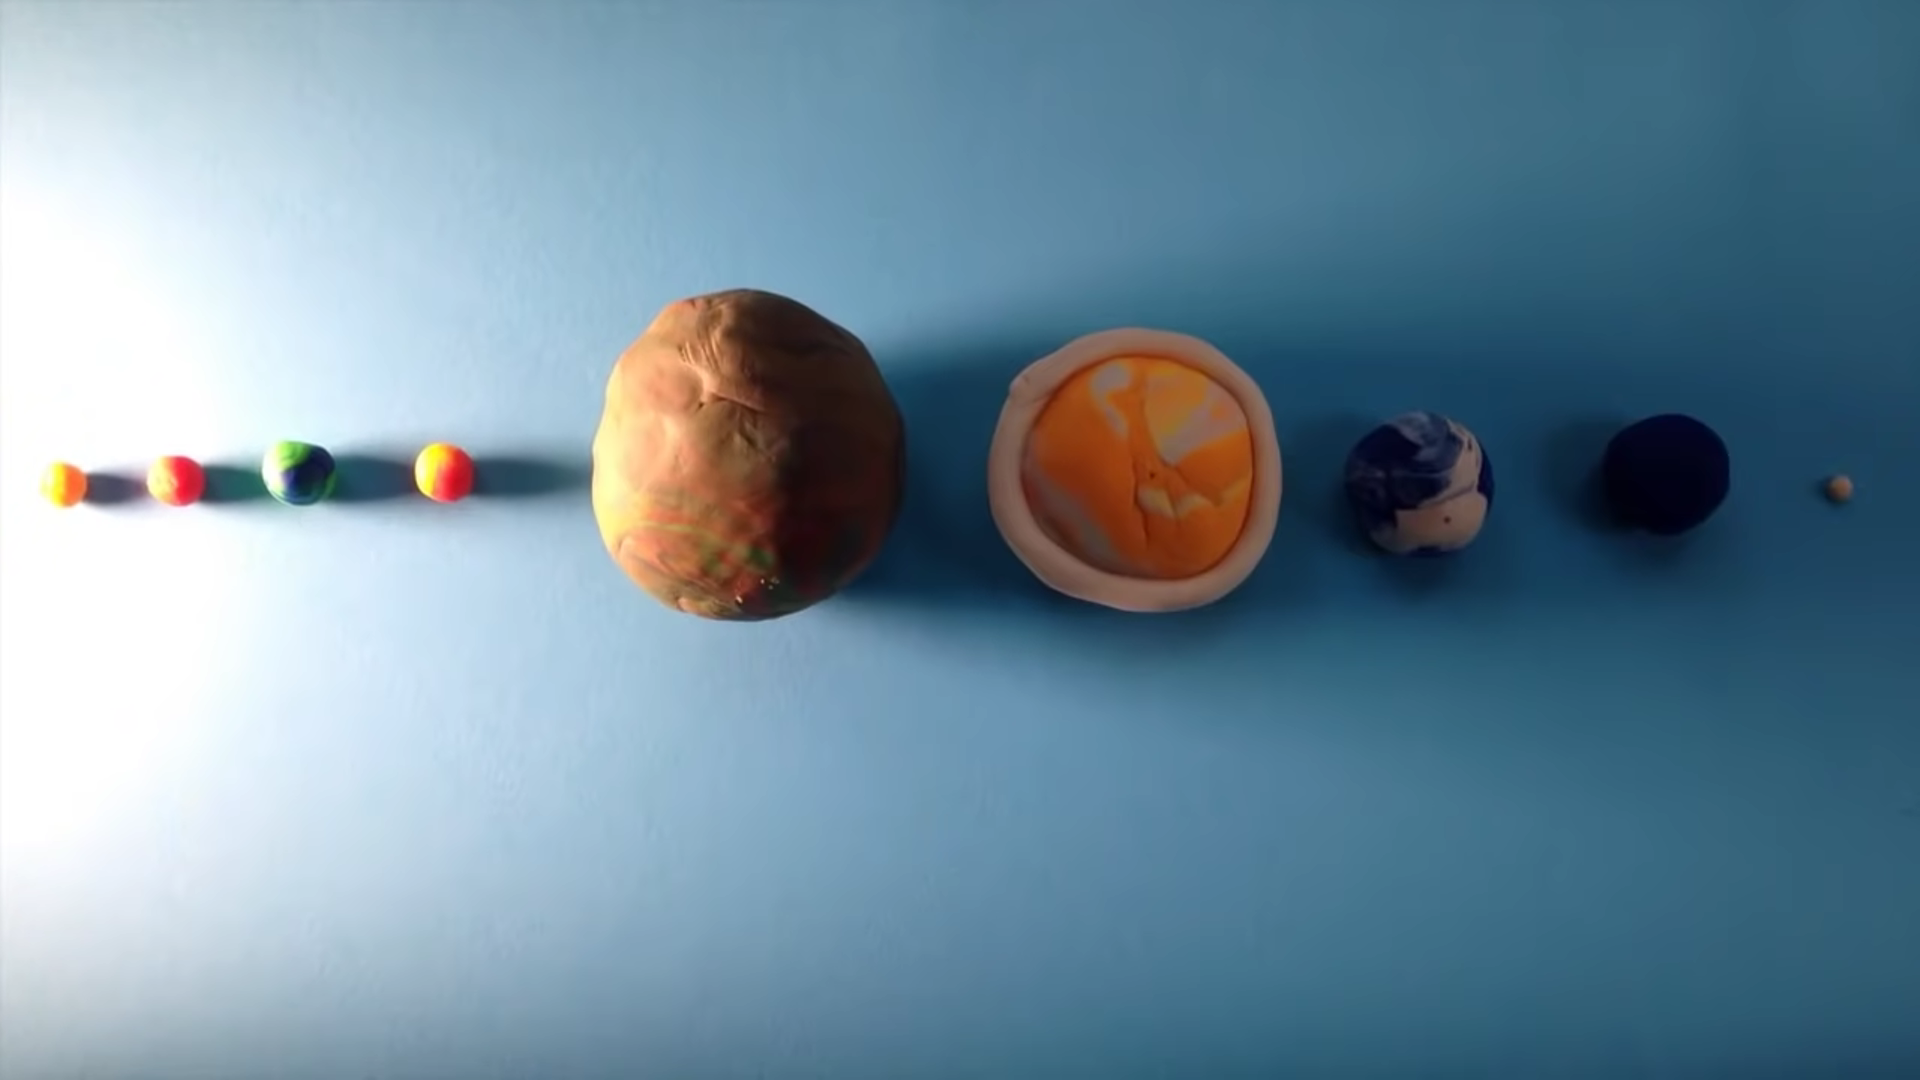 A fun activity for children to make their own Solar System.